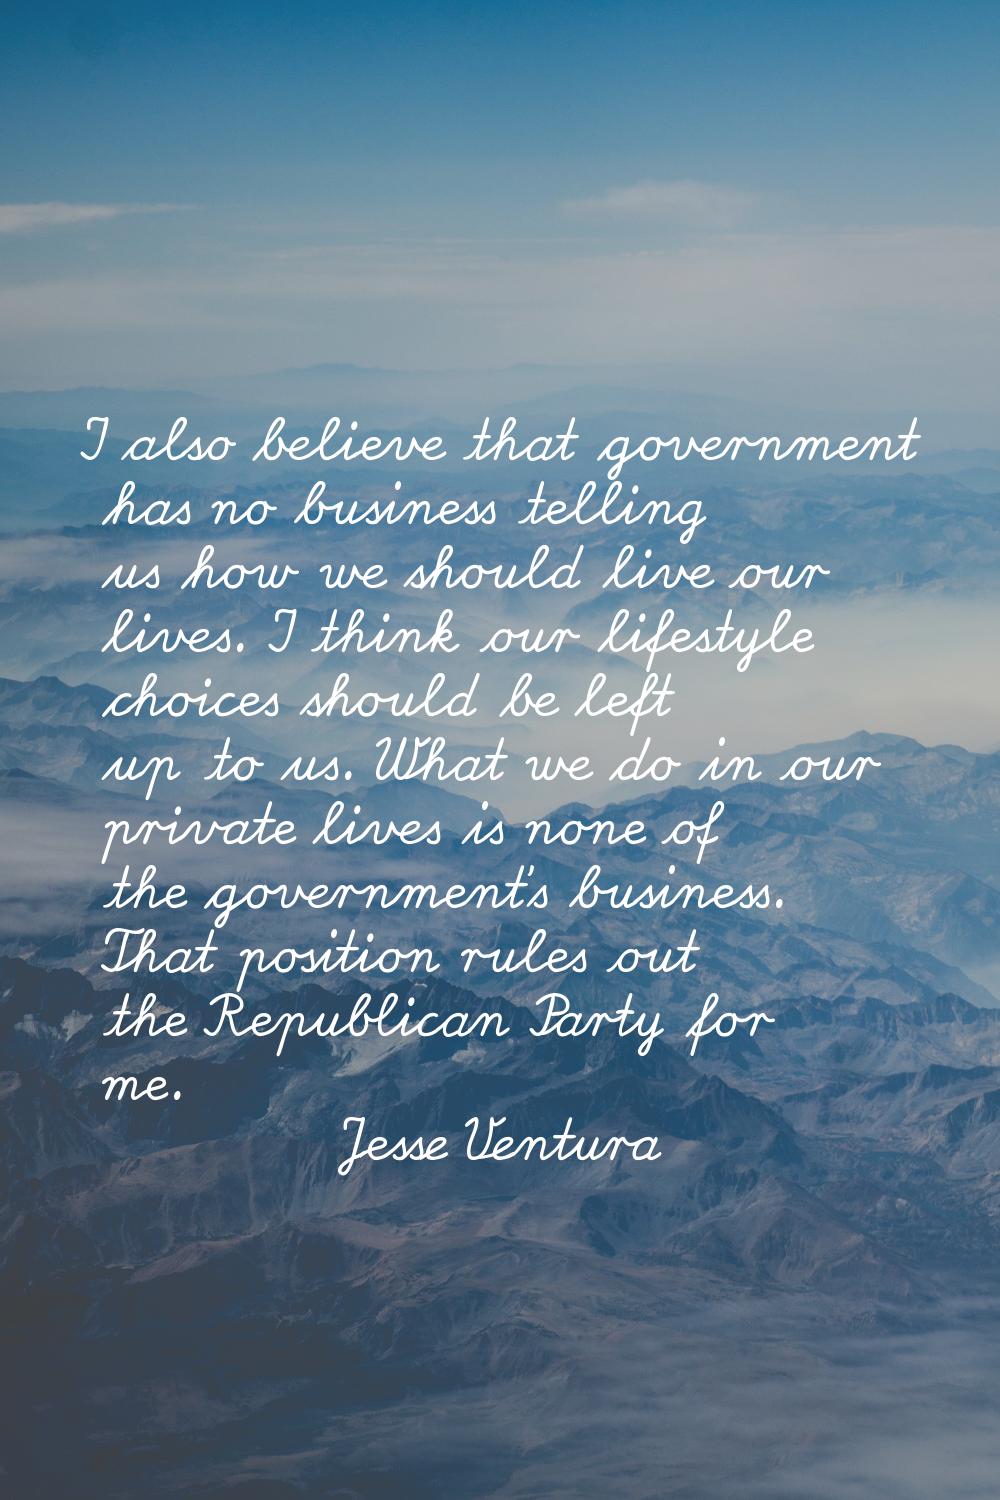 I also believe that government has no business telling us how we should live our lives. I think our